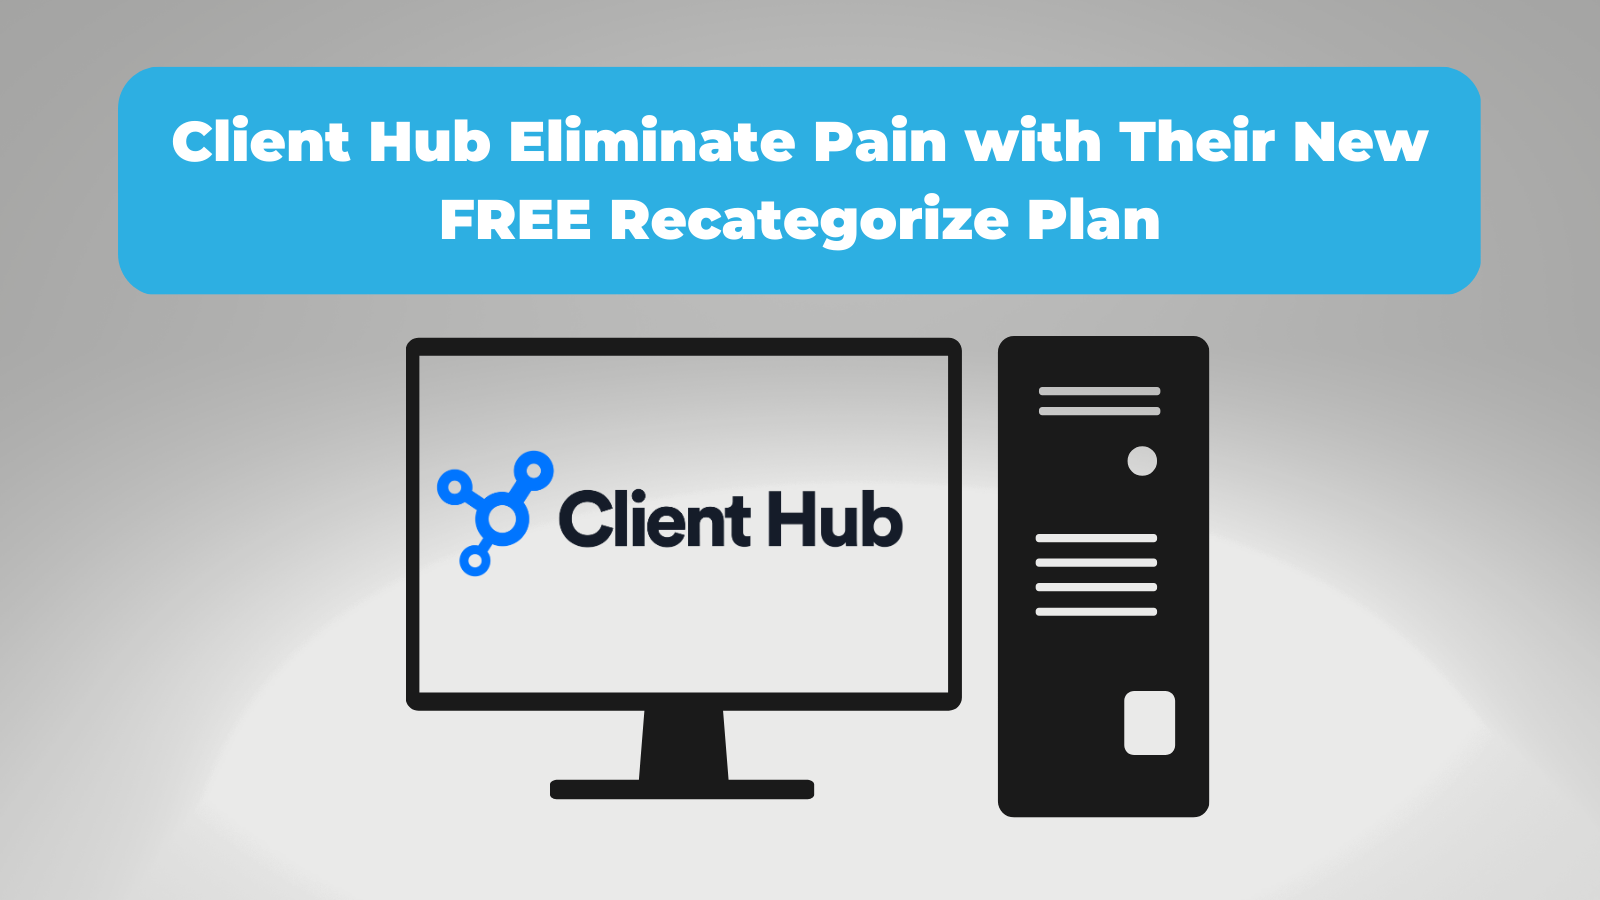 Client Hub Eliminate Pain with Their New FREE Recategorize Plan